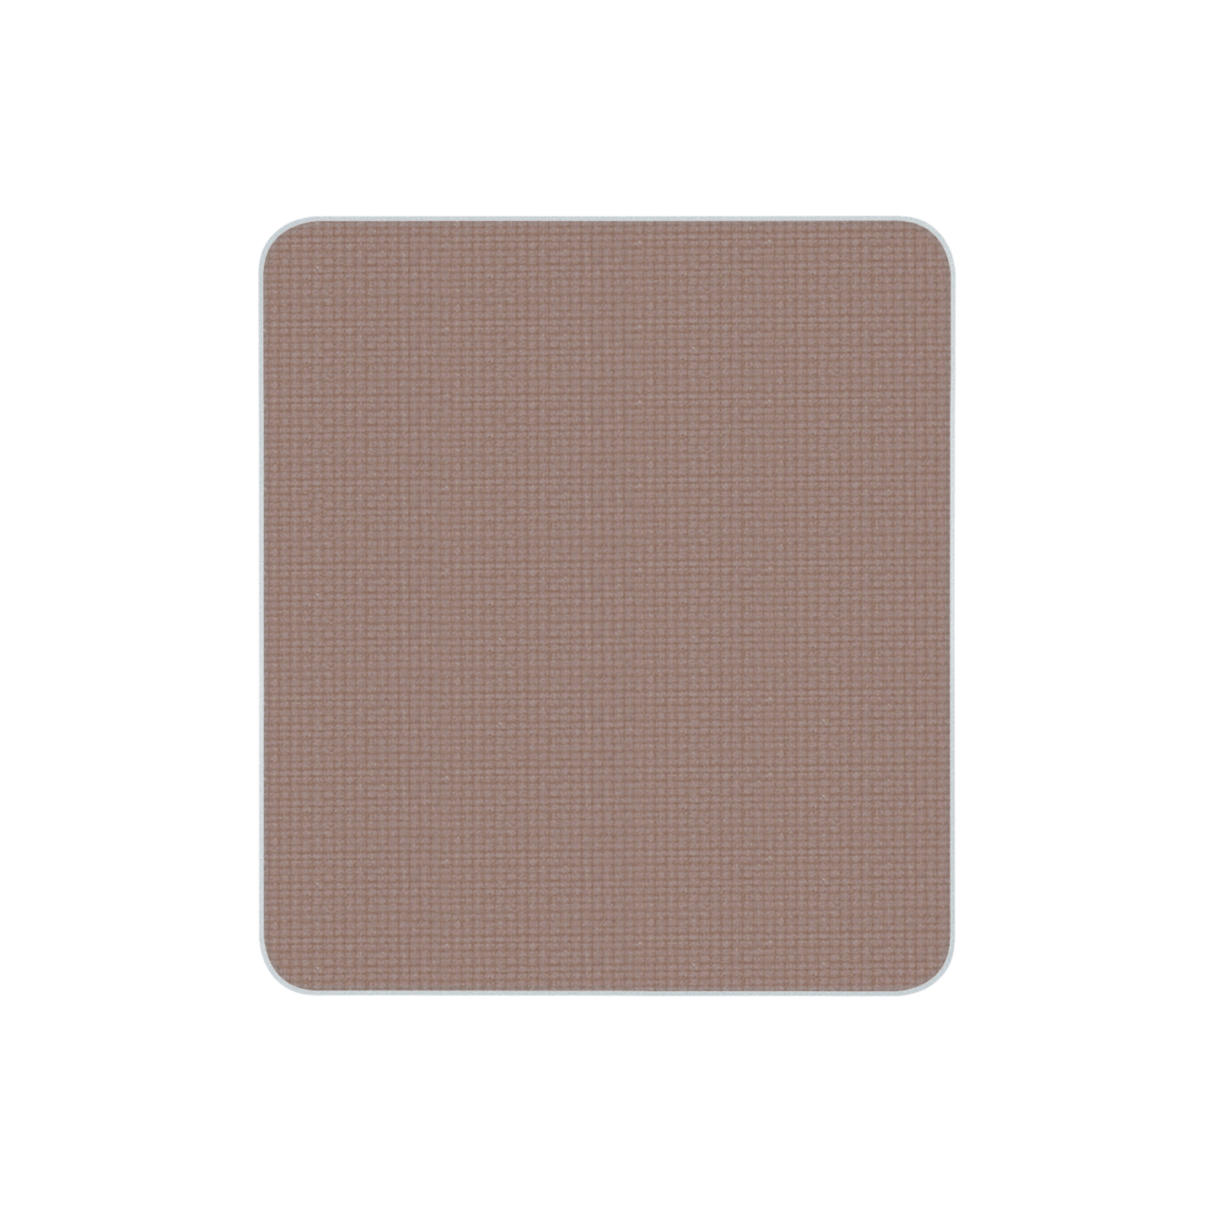 Makeup Forever Artist Color Eyeshadow Refill Dark Taupe M549